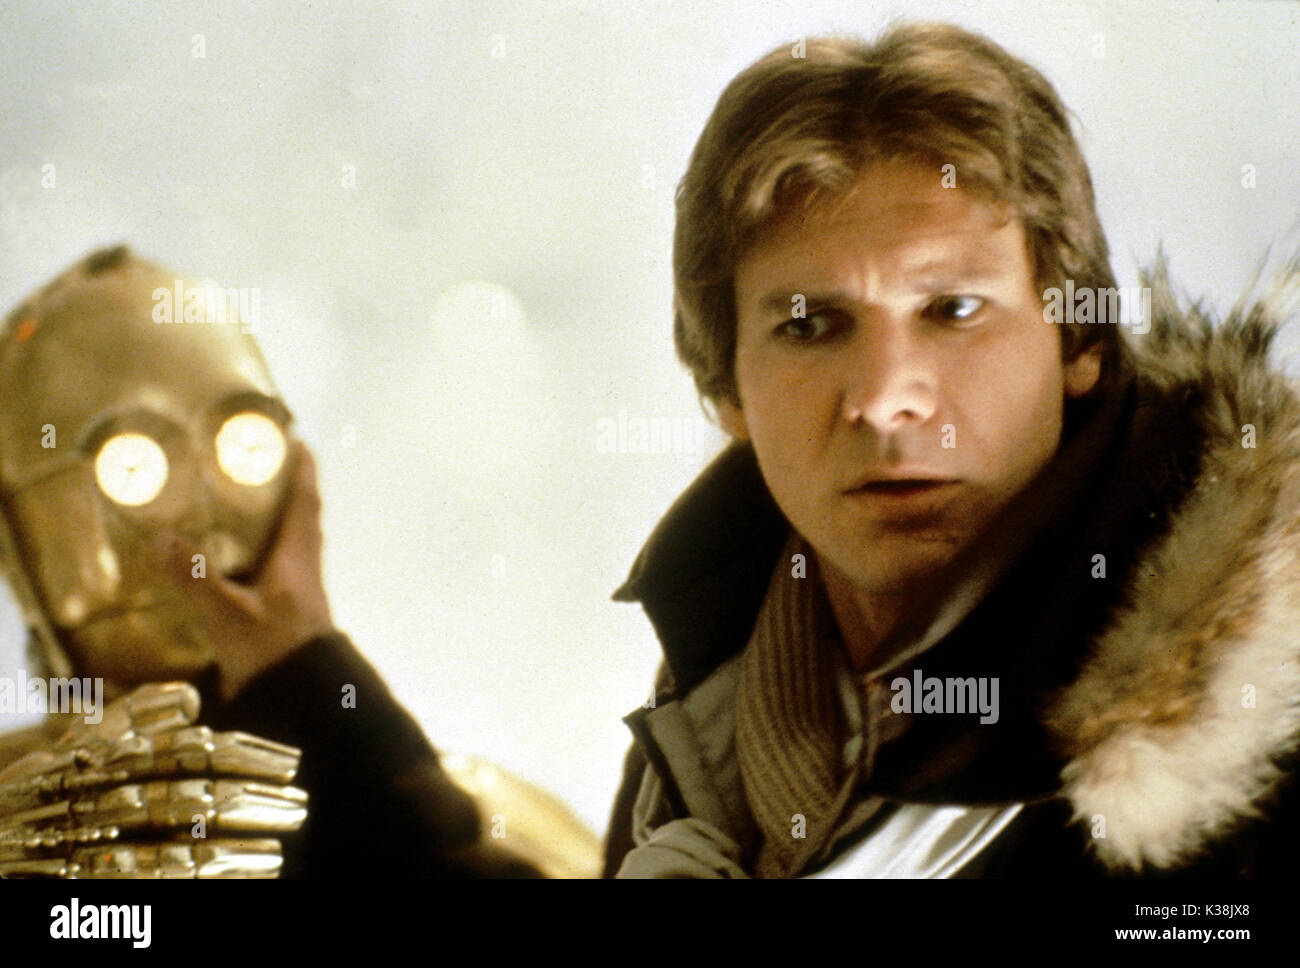 STAR WARS: EPISODE V - THE EMPIRE STRIKES BACK C-3PO performed by ANTHONY DANIELS, HARRISON FORD as Han Solo STAR WARS: EPISODE V - THE EMPIRE STRIKES BACK Stock Photo